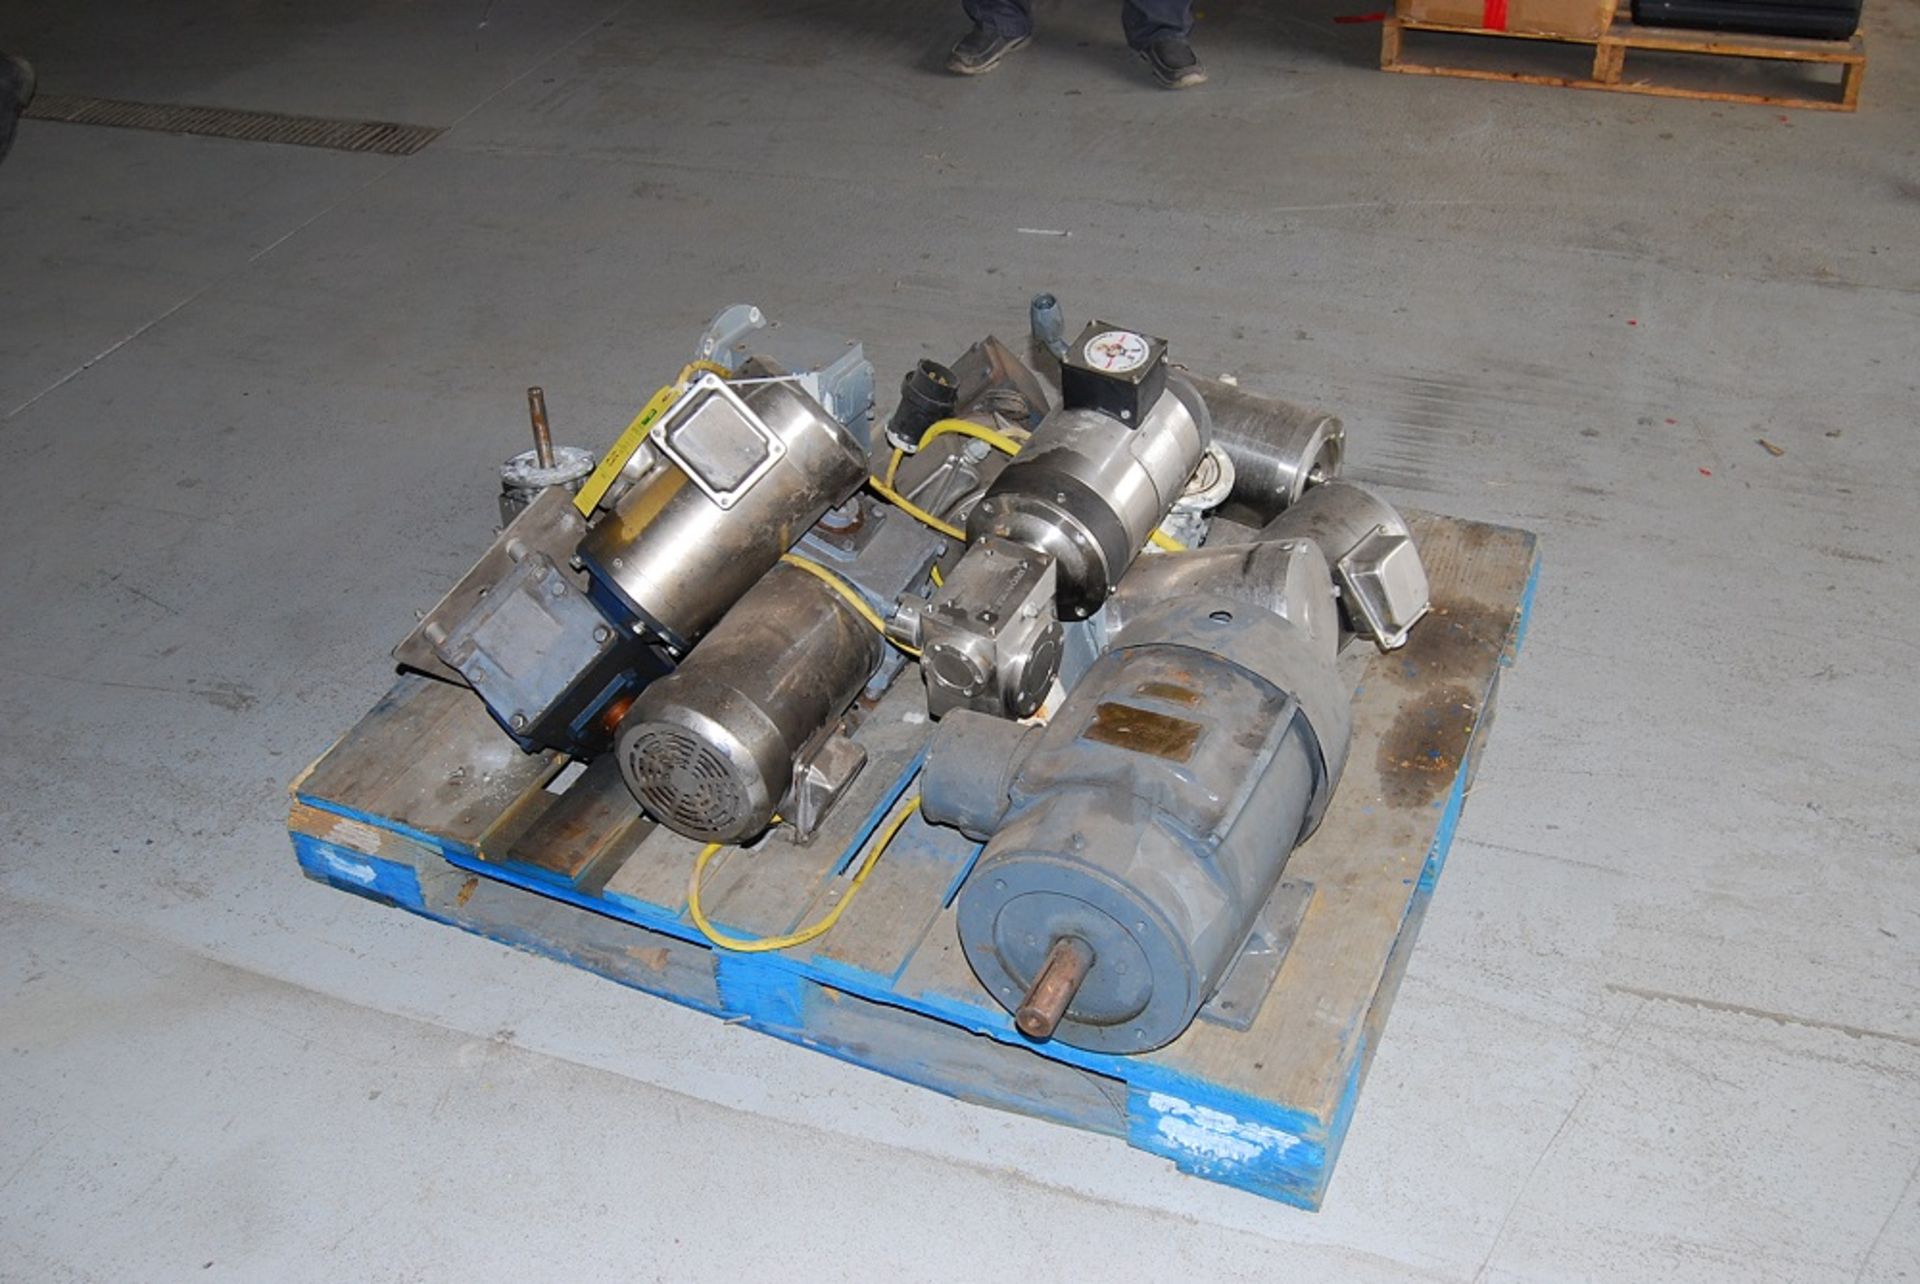 Miscellaneous Pallet Of Motors and Gear Boxes Pallet: 40" wide x 48" deep x 26" tall - Image 5 of 6